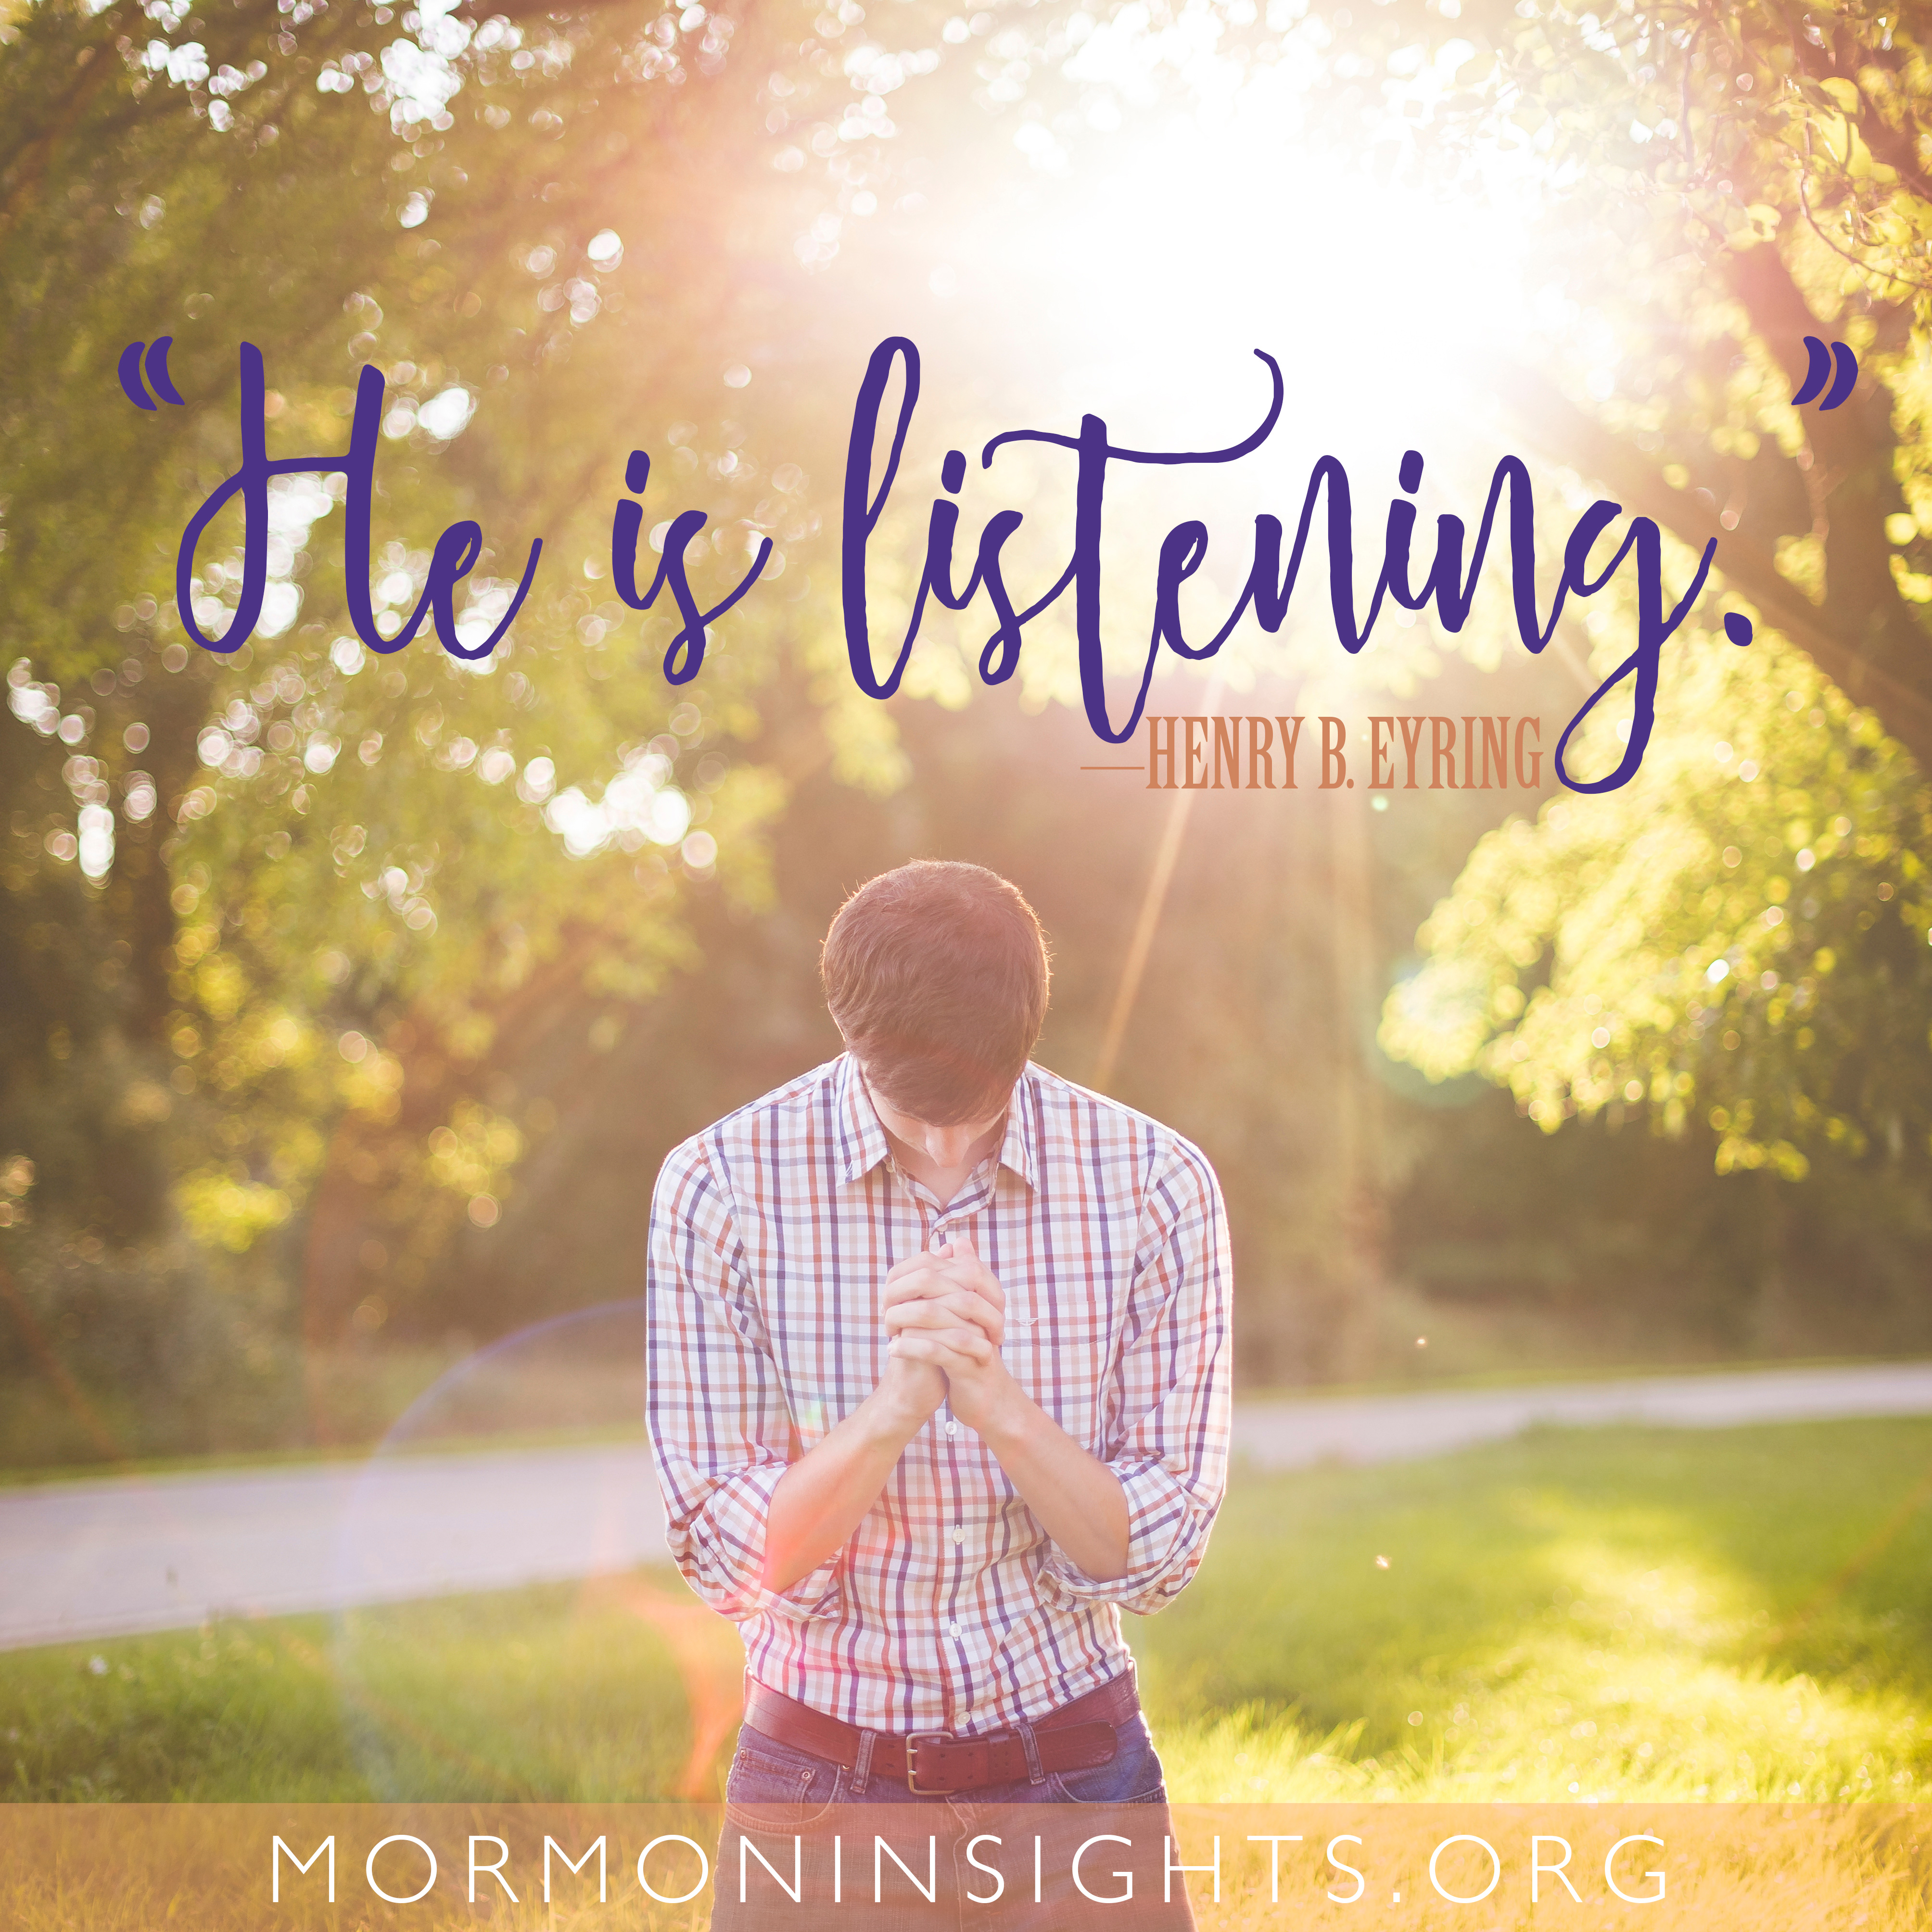 "He is listening." -Henry B. Eyring